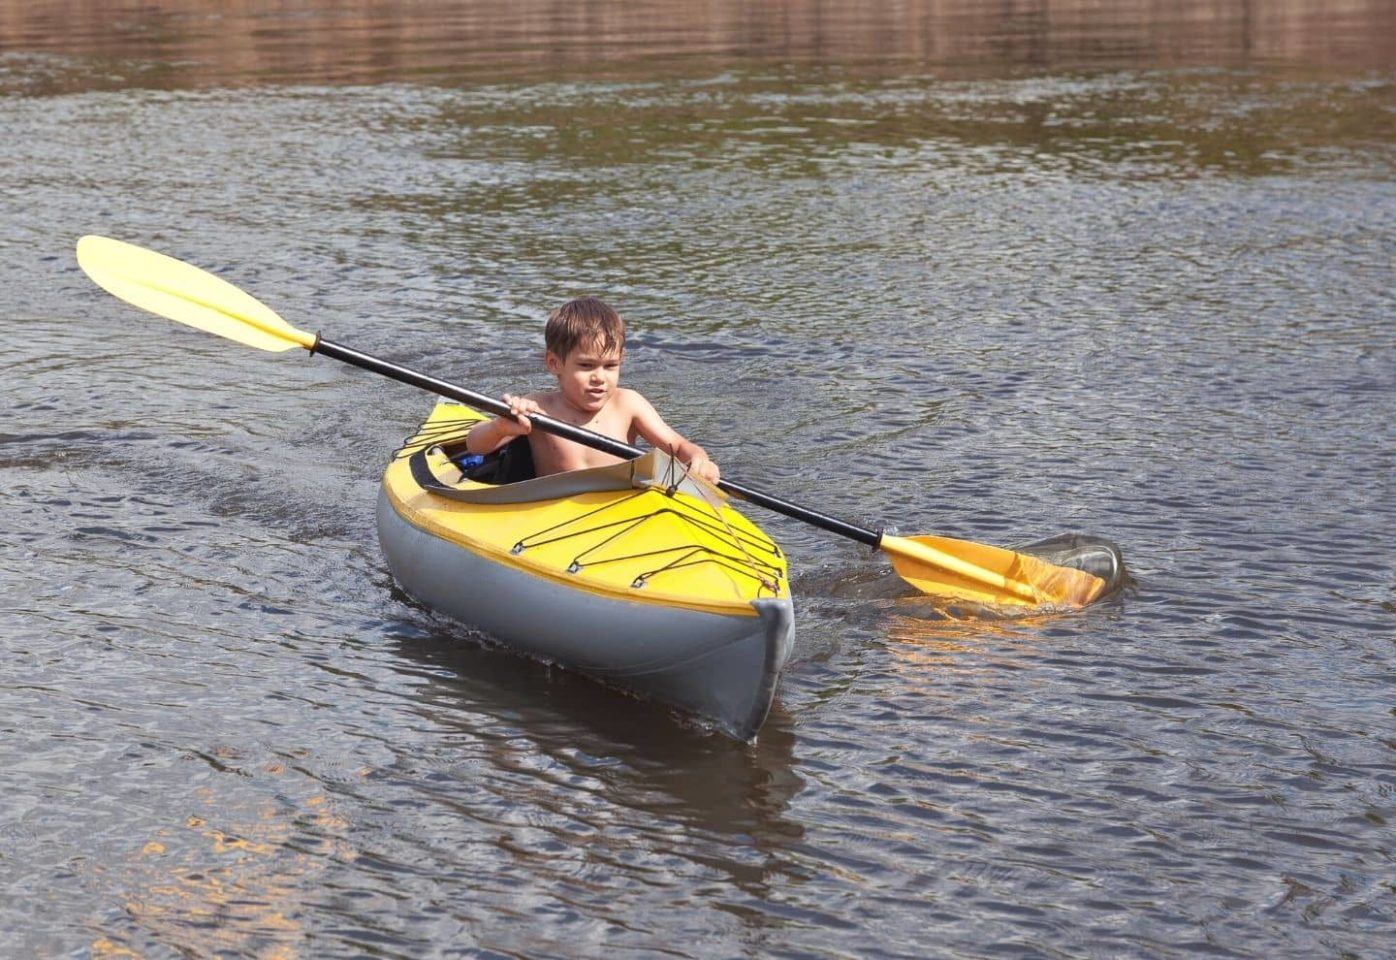 The little boy on a yellow kayak